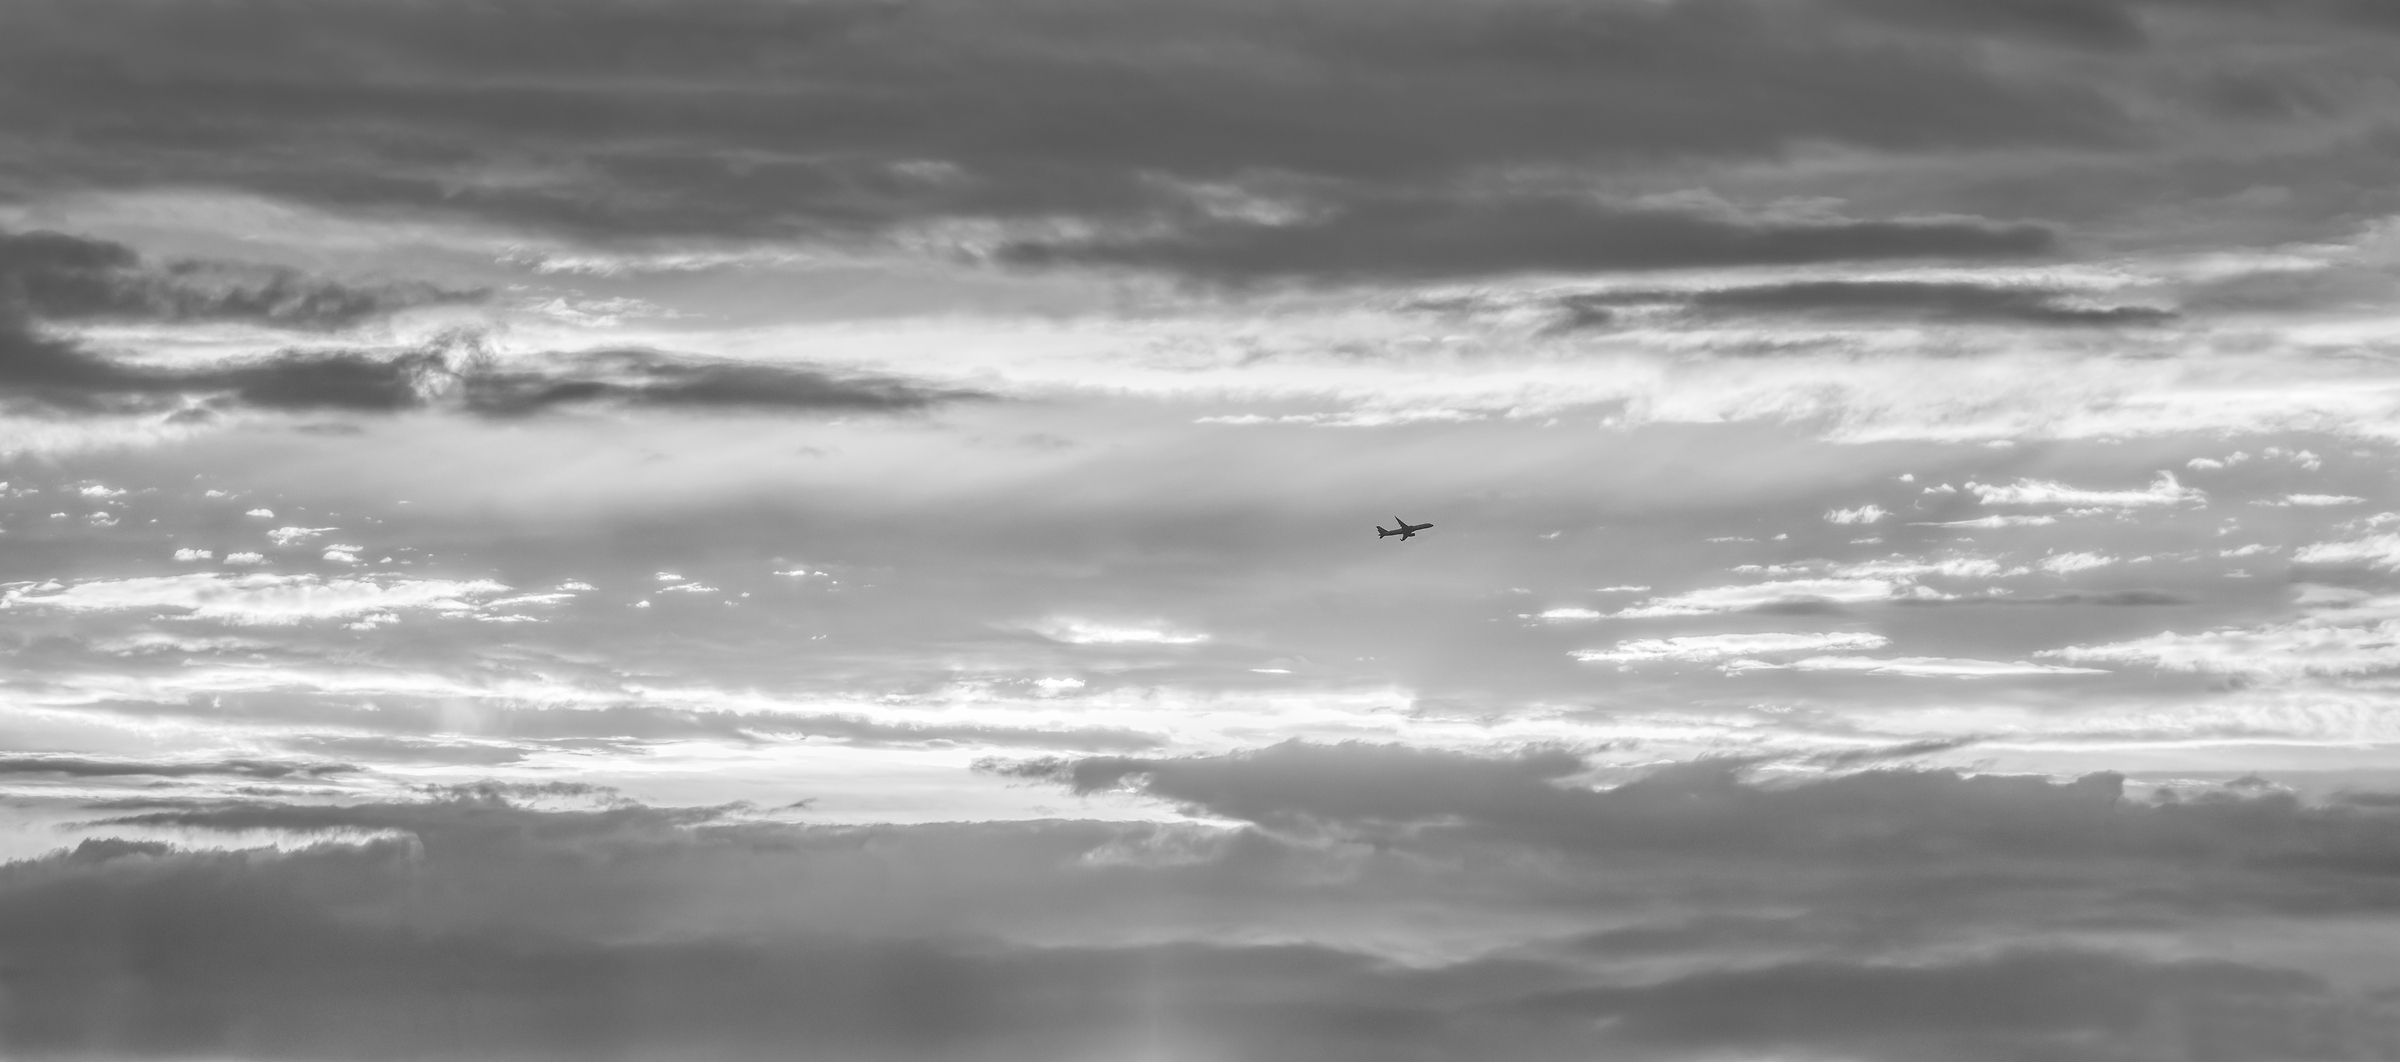 328 megapixels! A very high resolution, black & white VAST photo print of a plane with a sunset behind it; fine art photograph created by Dan Piech in New York City